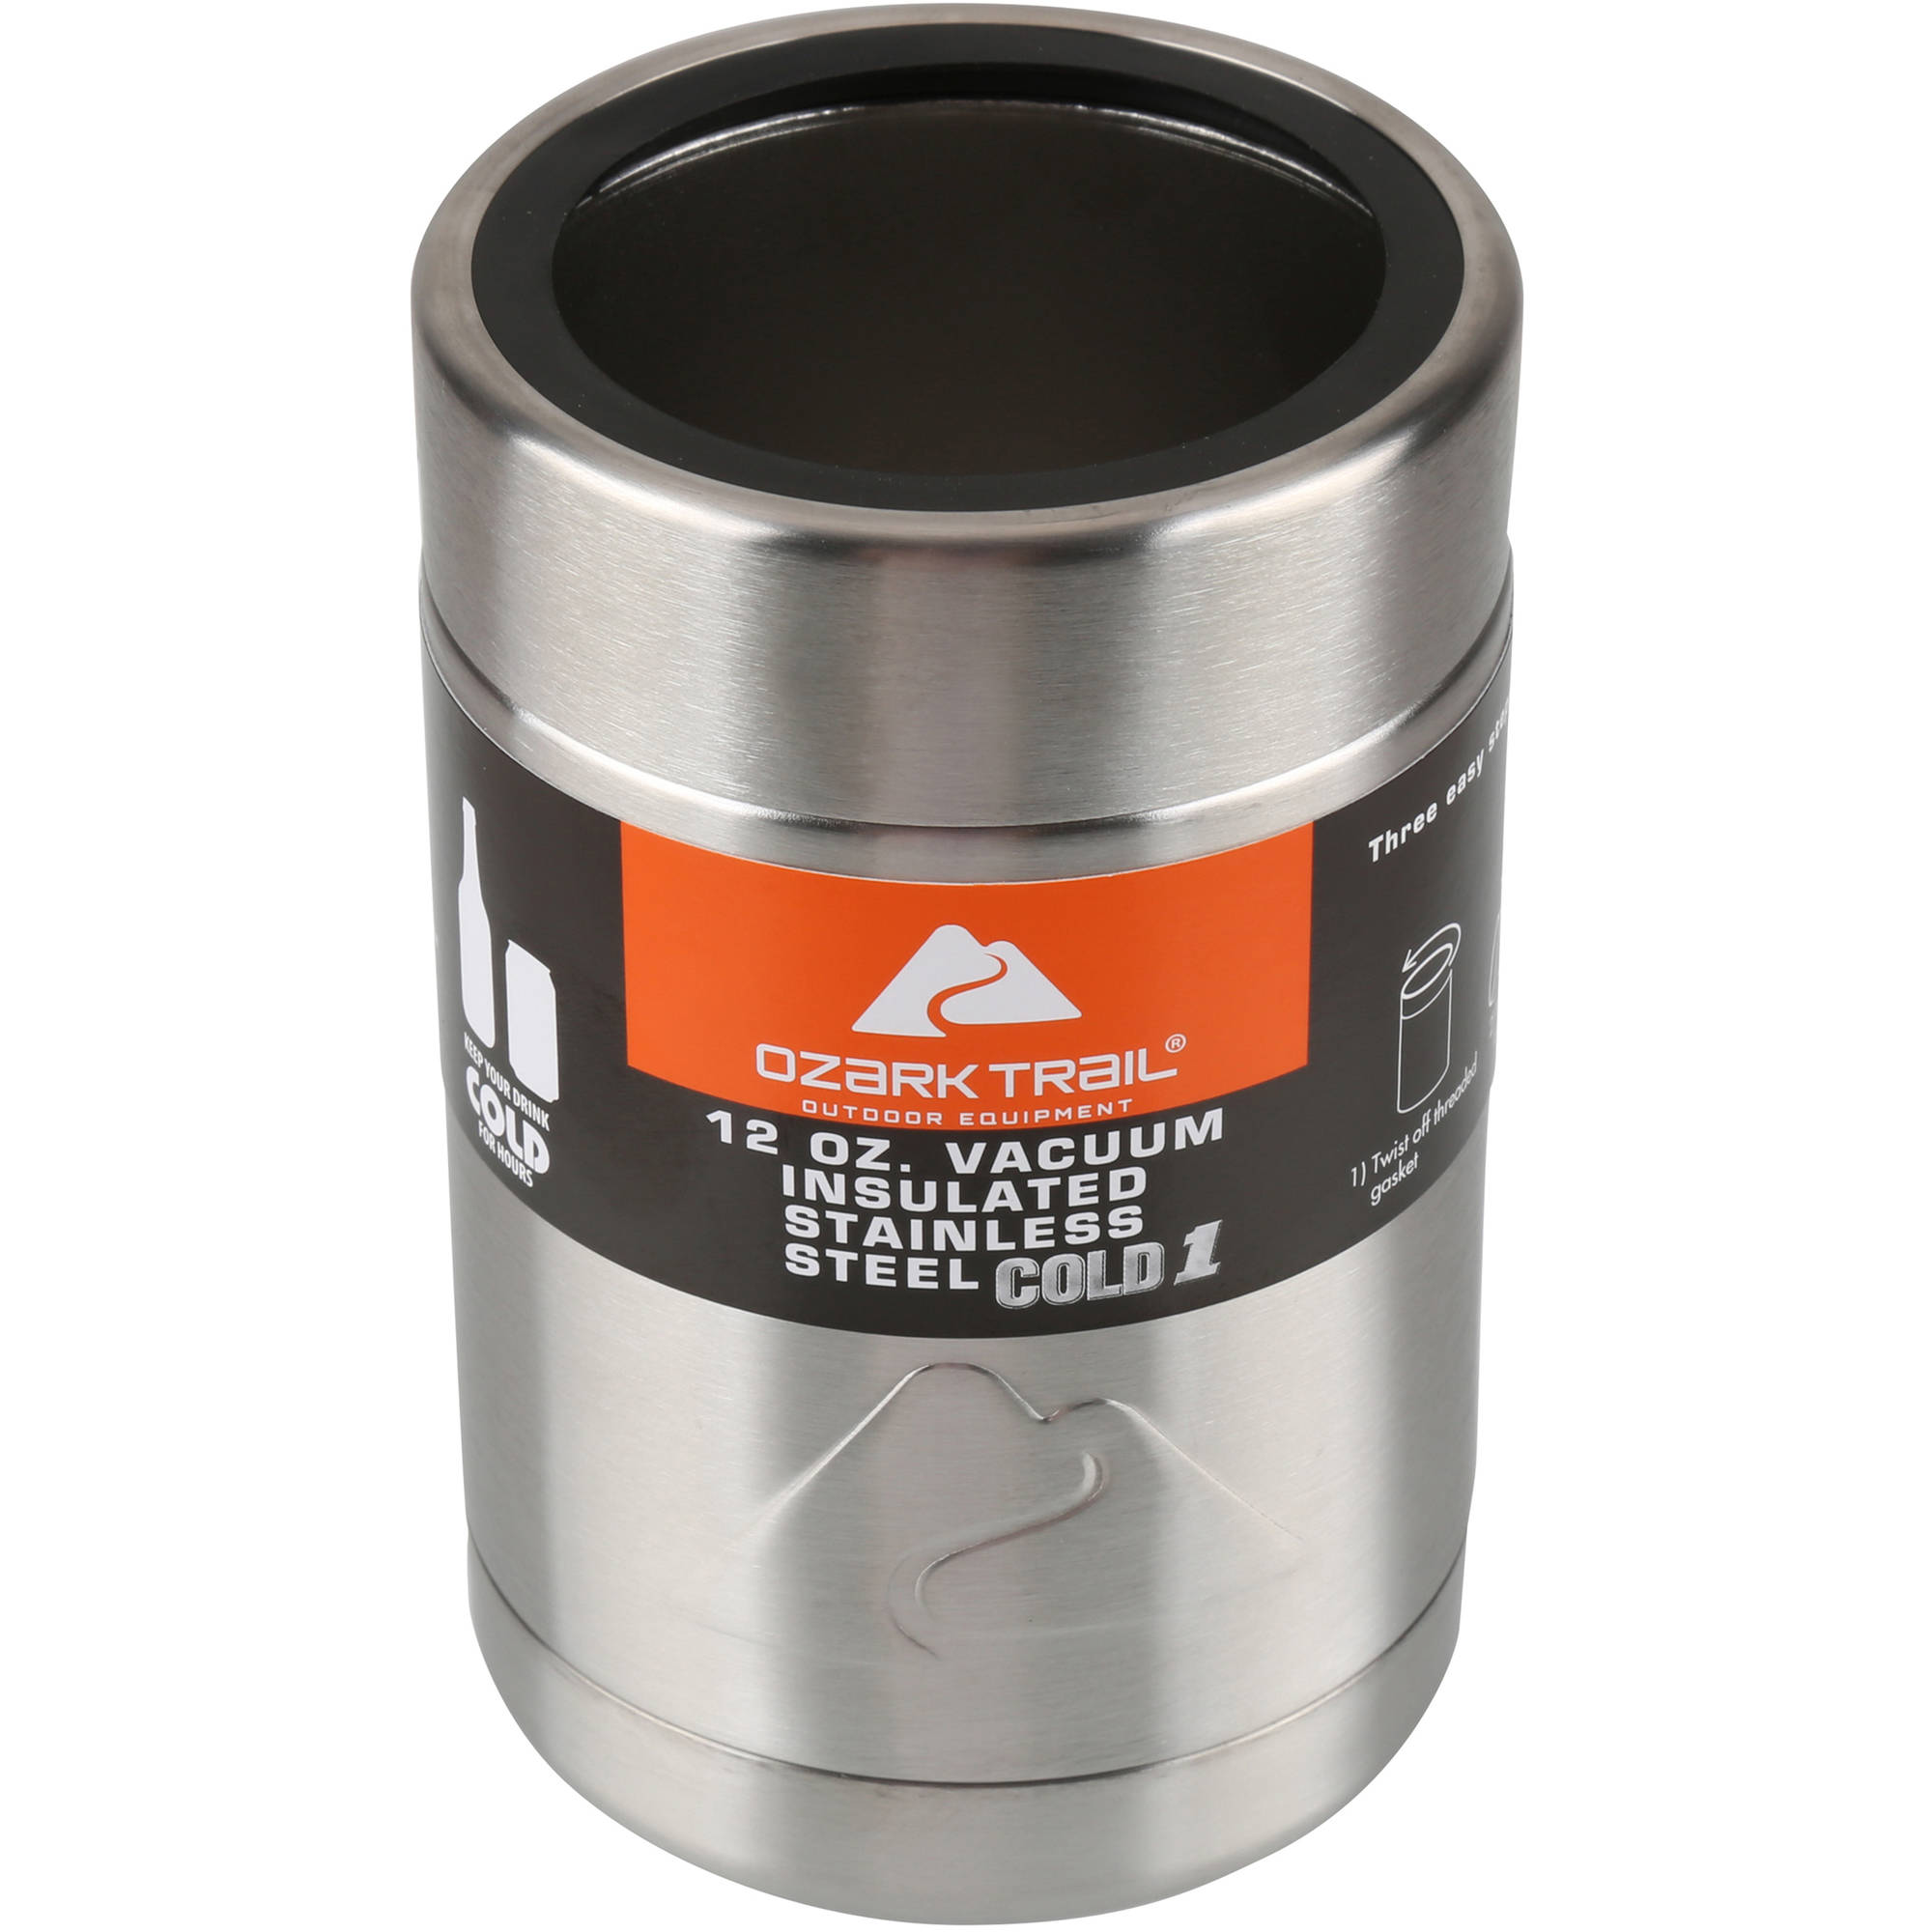 Ozark Trail 12-ounce vacuum insulated can cooler for $4